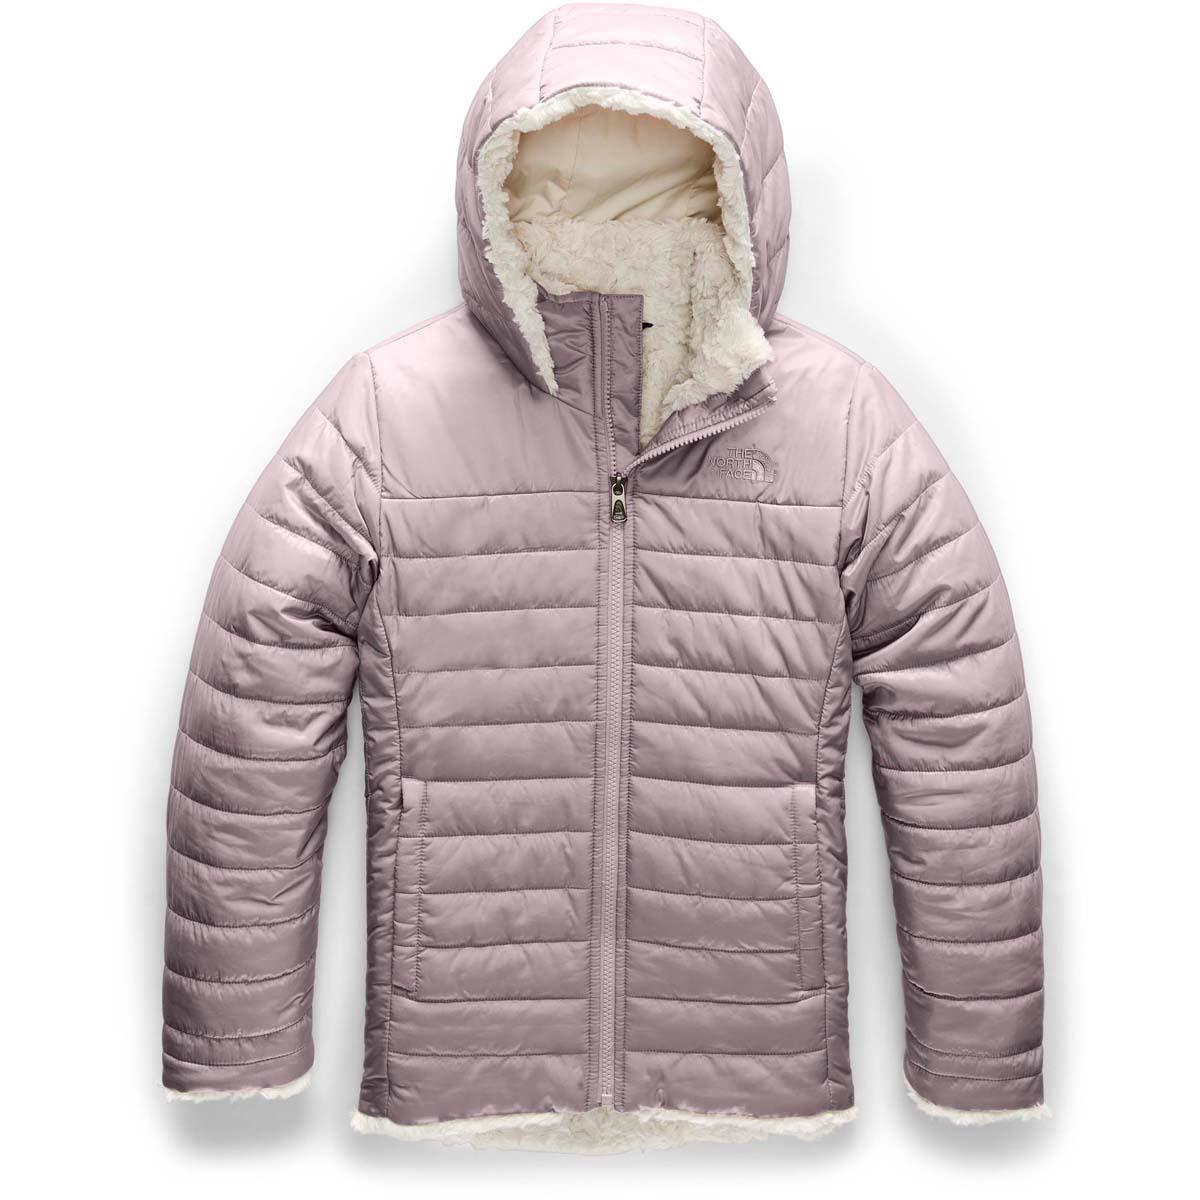 the north face girls parka